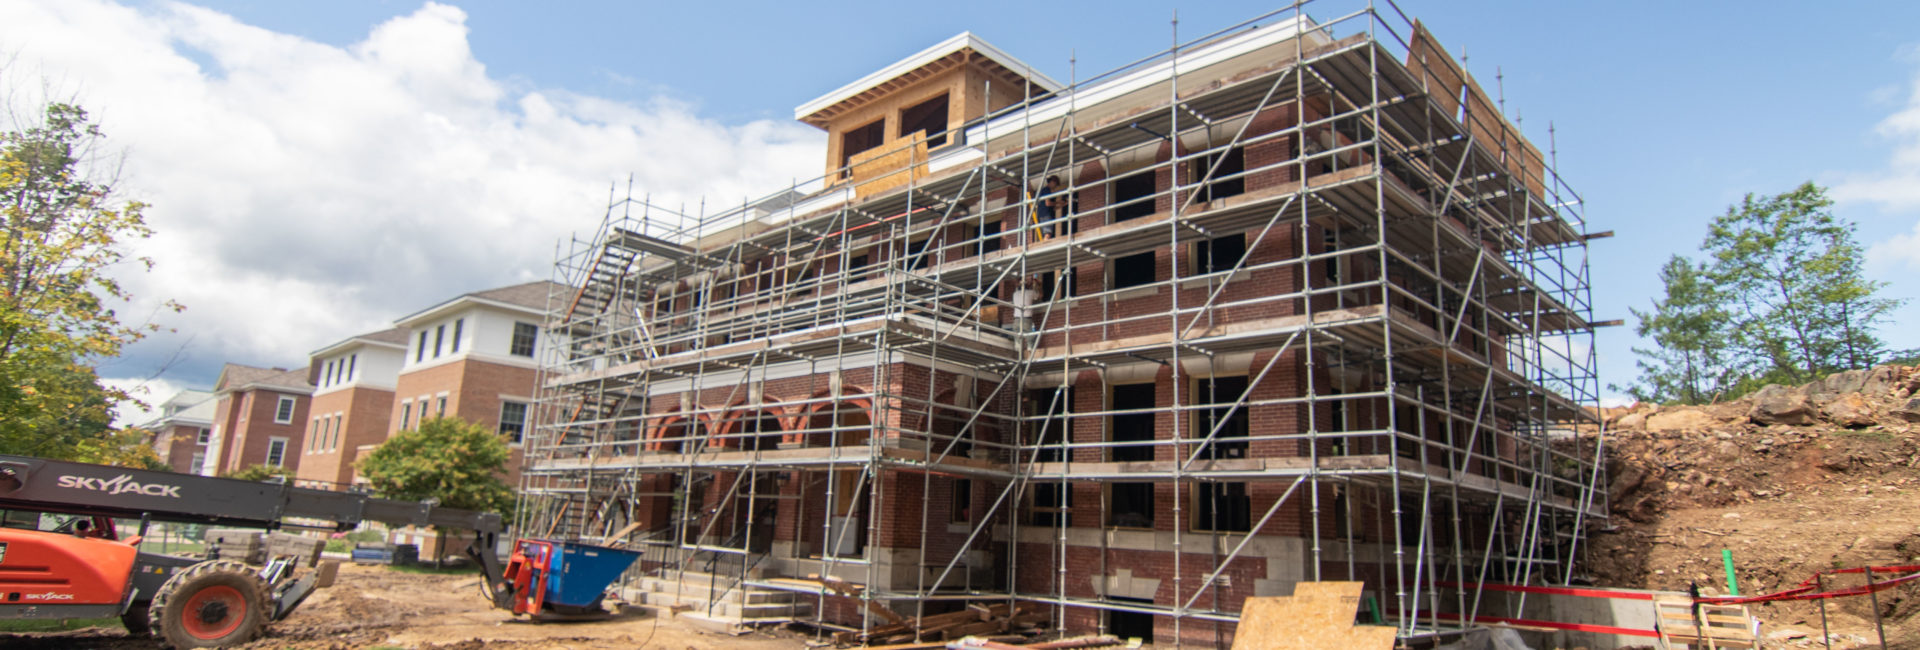 Exterior of brick building surrounded by metal scaffolding